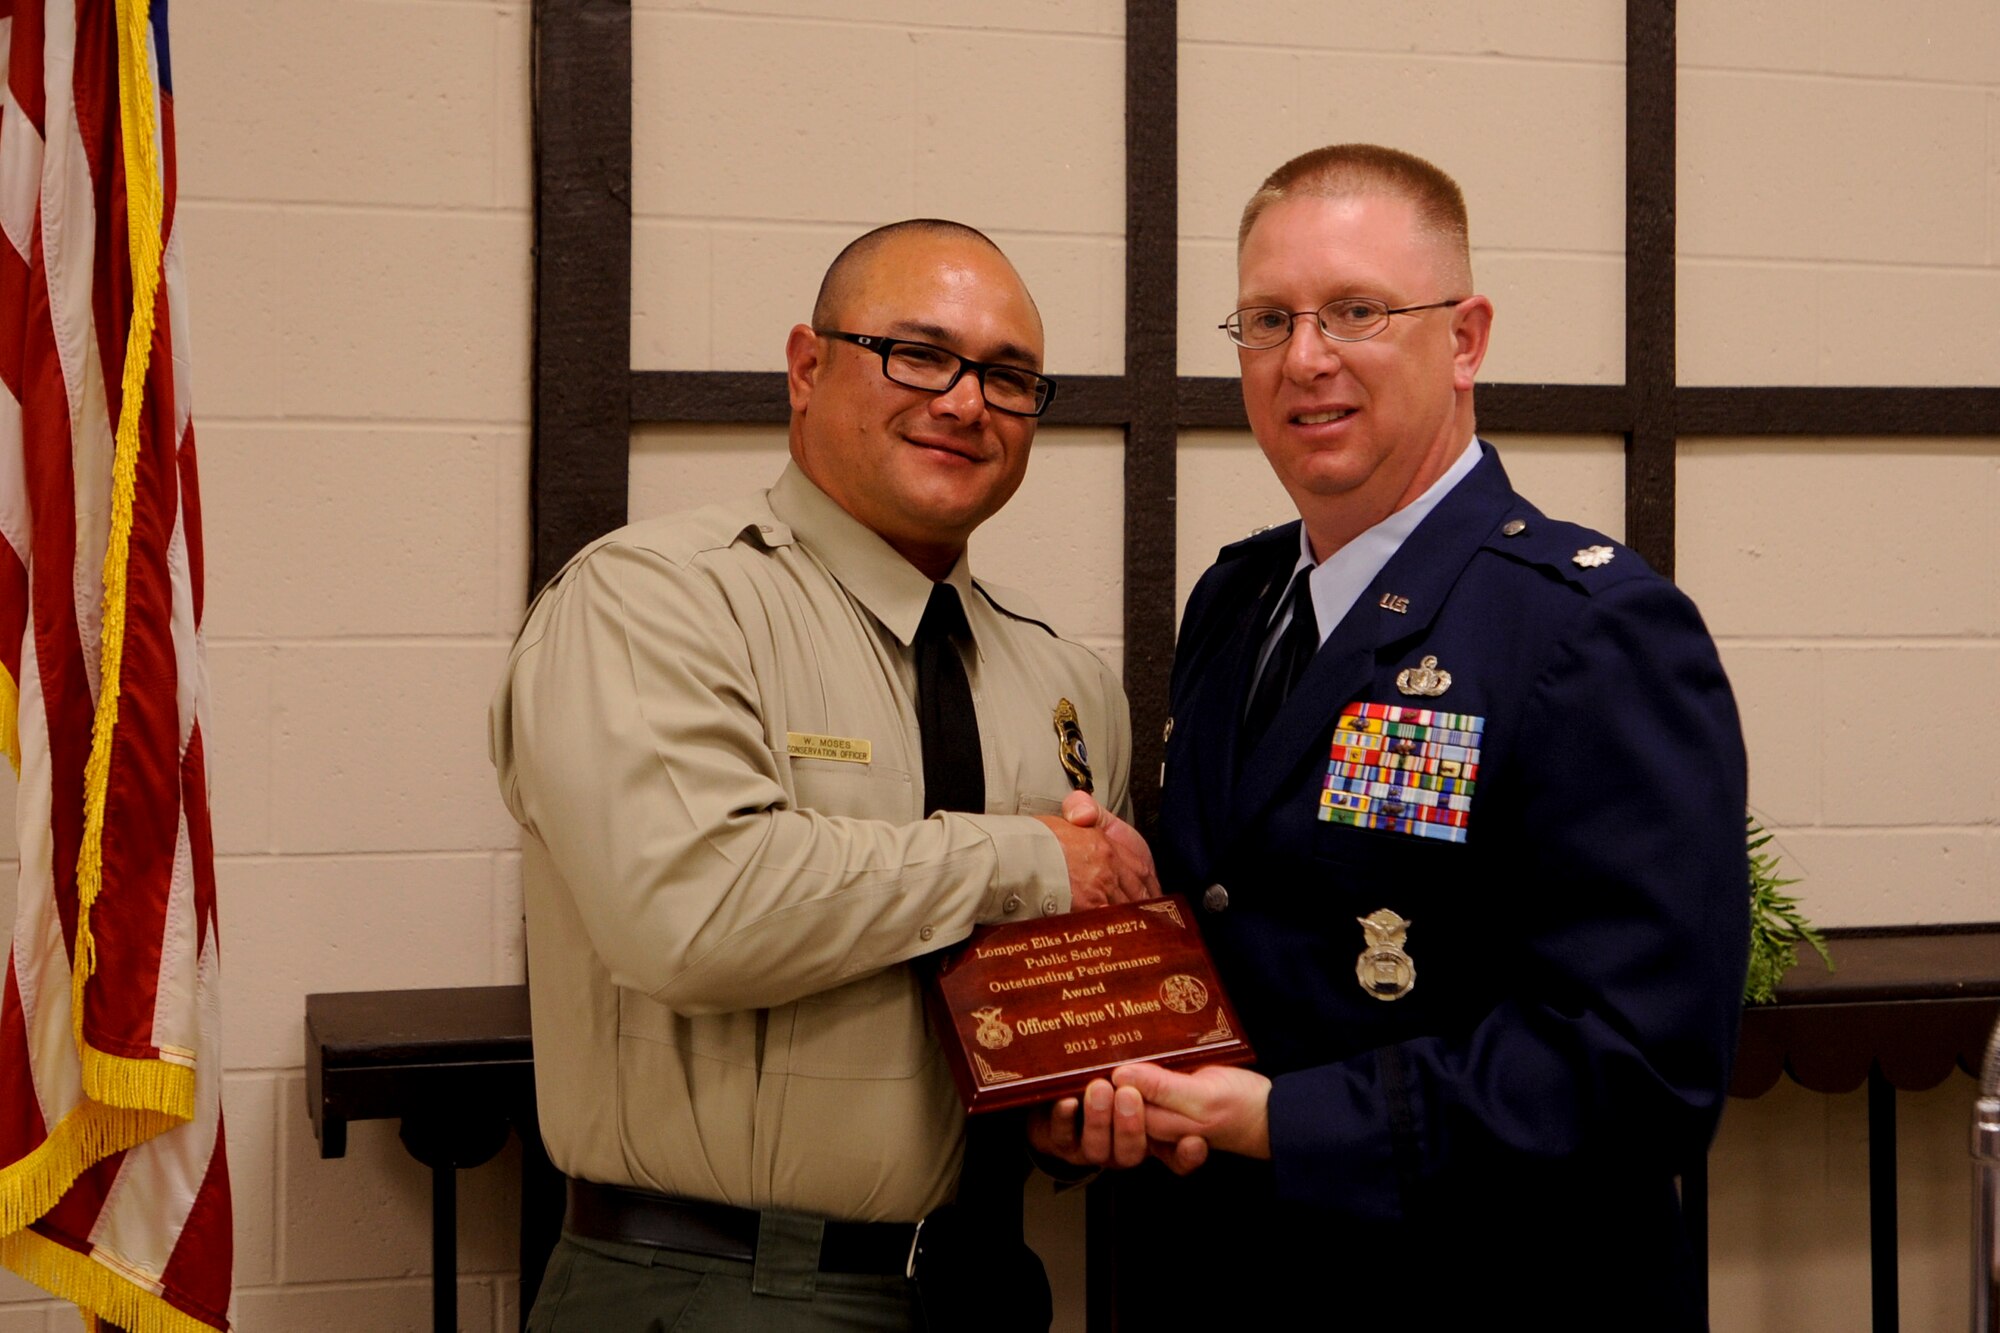 4/22/2013 – LOMPOC, Calif. – Officer Wayne V. Moses, 30th Security Forces Squadron officer, and Lt. Col. Gerald Mulhollen, 30th SFS commander, pose for a photo during the Elks annual Public Employees Safety Night at the Lompoc Elks Lodge Thursday, April 18, 2013. The Lompoc Elks, a charitable foundation with a 141 year history, awarded Moses an Outstanding Performance Award for his passion for volunteering and professional accomplishments. (U.S. Air Force photo/Airman Yvonne Morales)